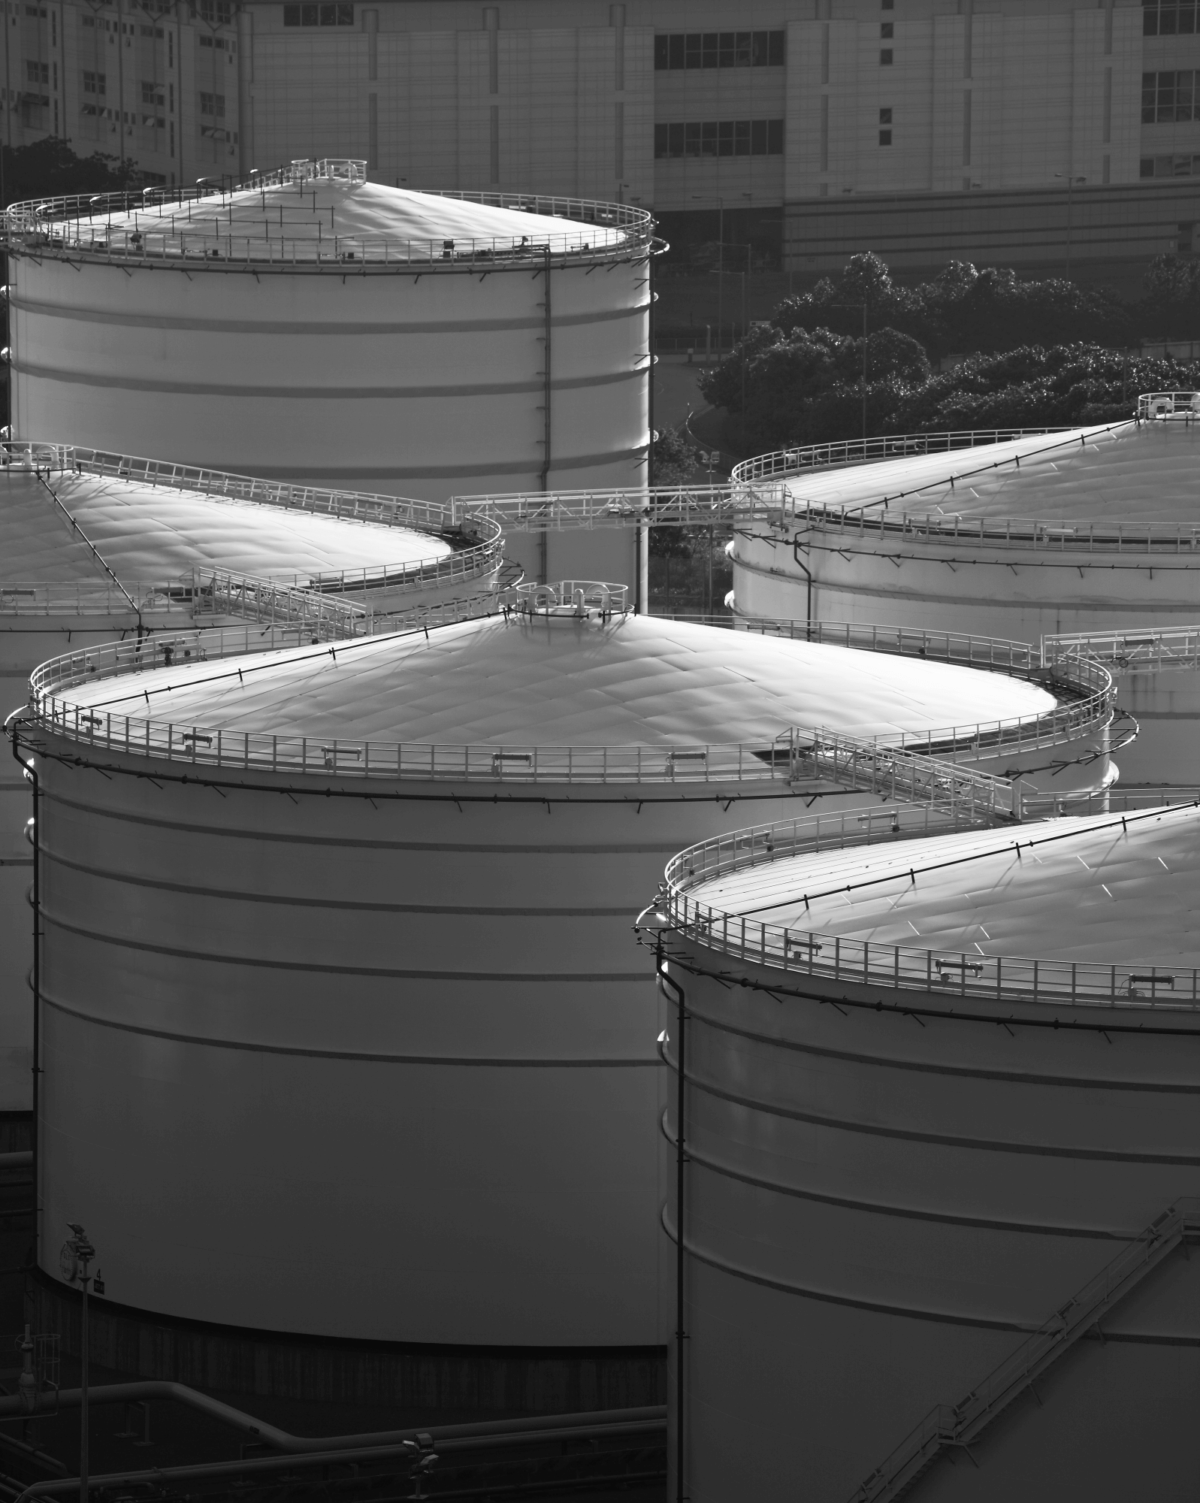 The impact of changing supply and demand balances on tank terminals